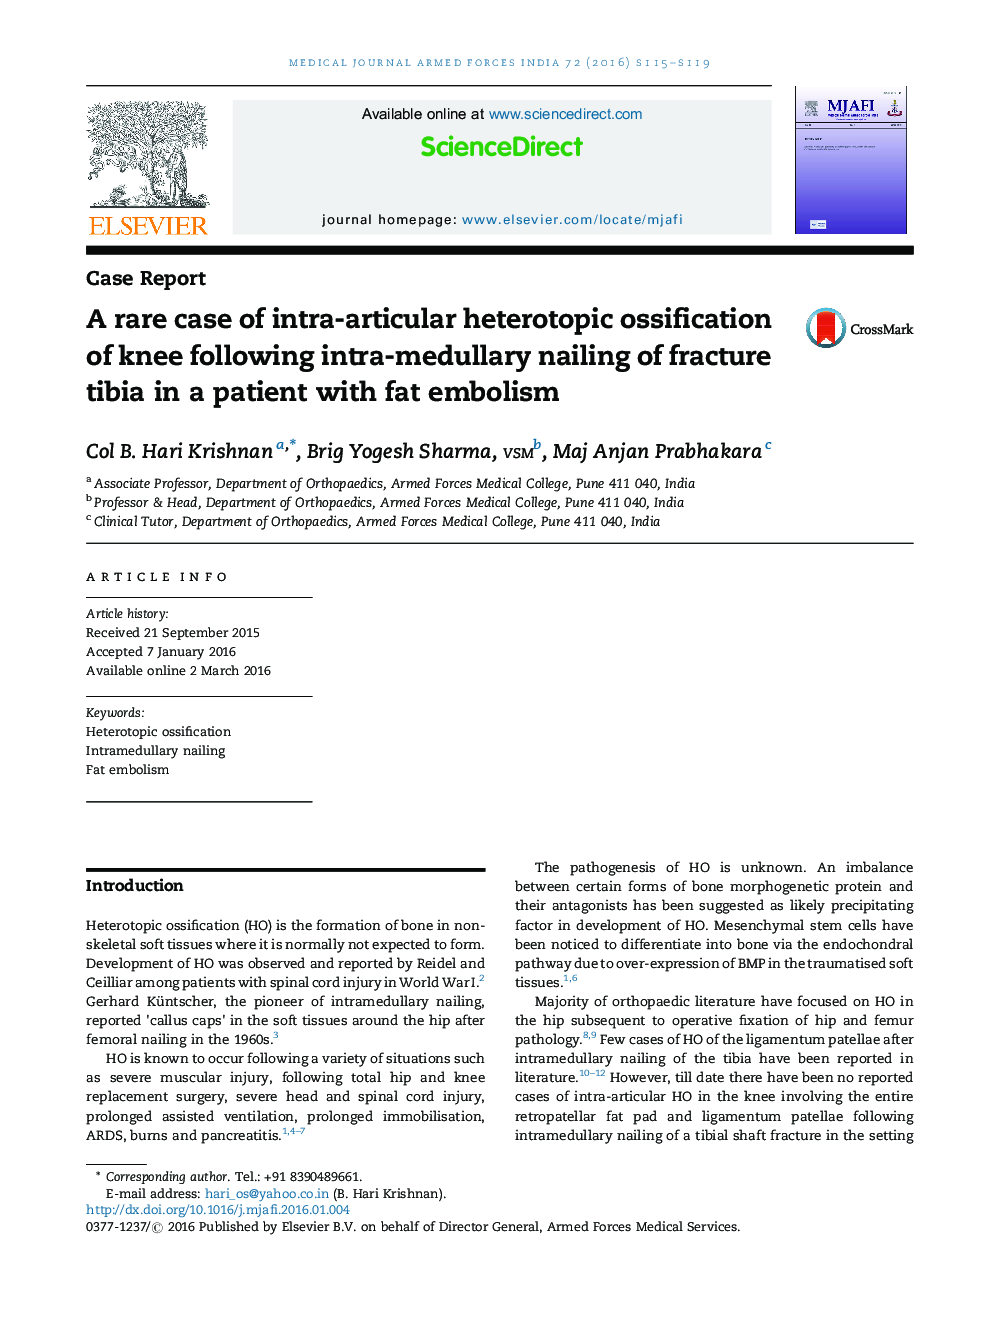 A rare case of intra-articular heterotopic ossification of knee following intra-medullary nailing of fracture tibia in a patient with fat embolism